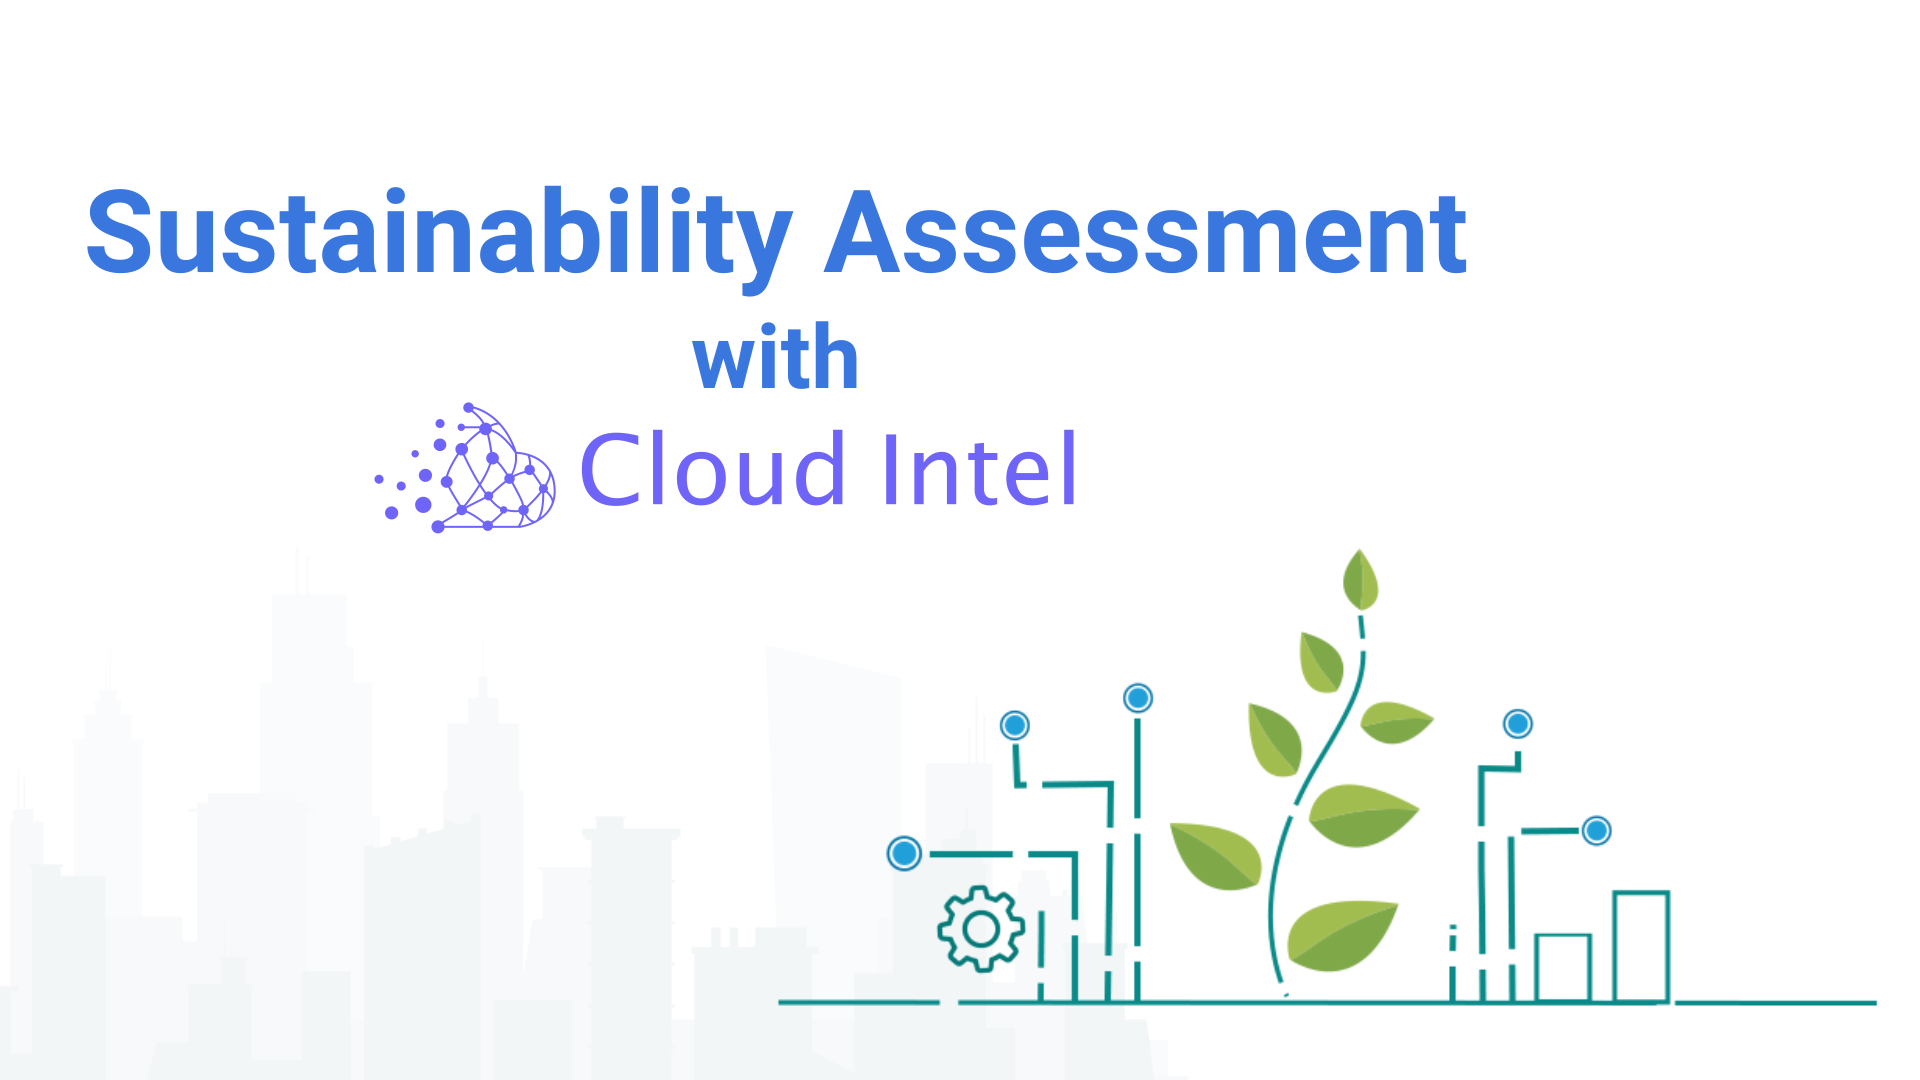 Click2cloud-Drive sustainable business transformation with Sustainability Assessment | Cloud Intel_Video